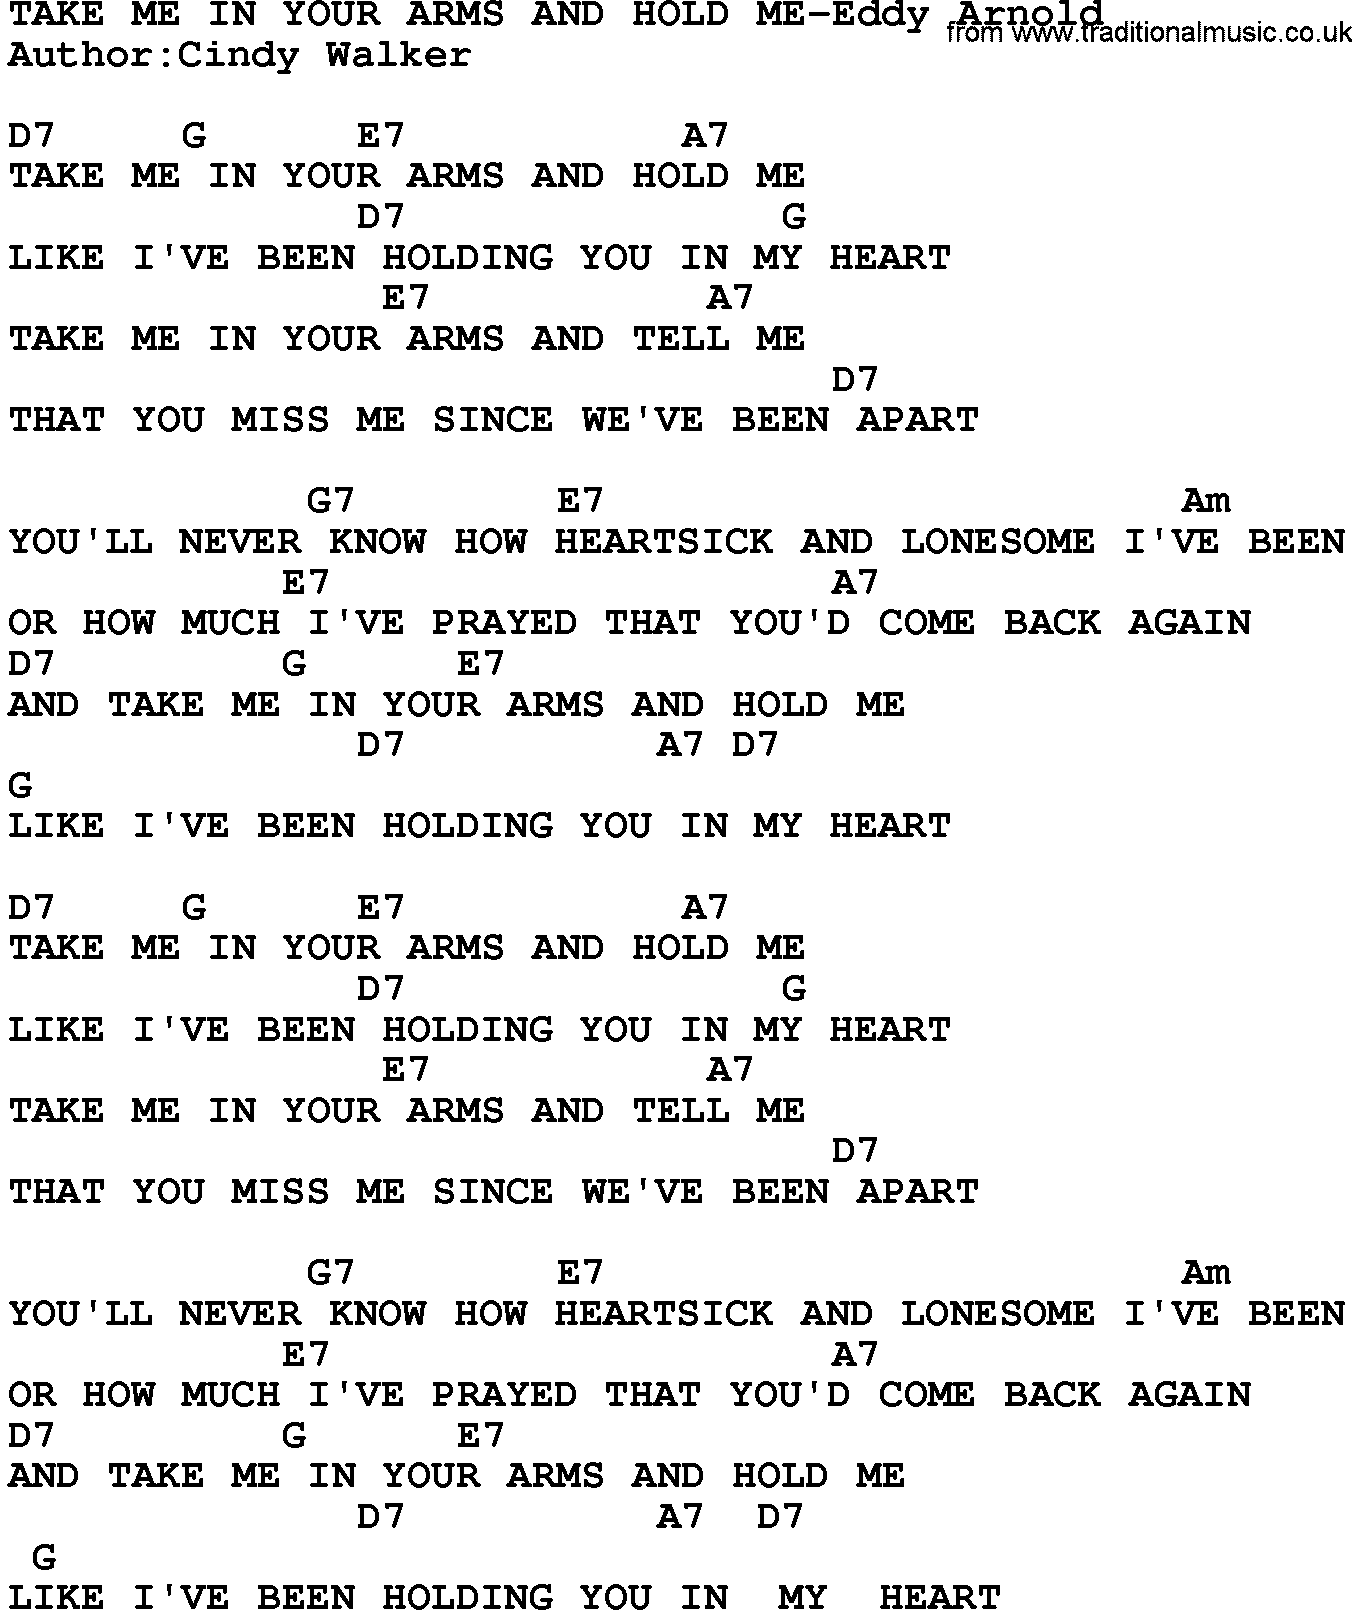 Country music song: Take Me In Your Arms And Hold Me-Eddy Arnold lyrics and chords